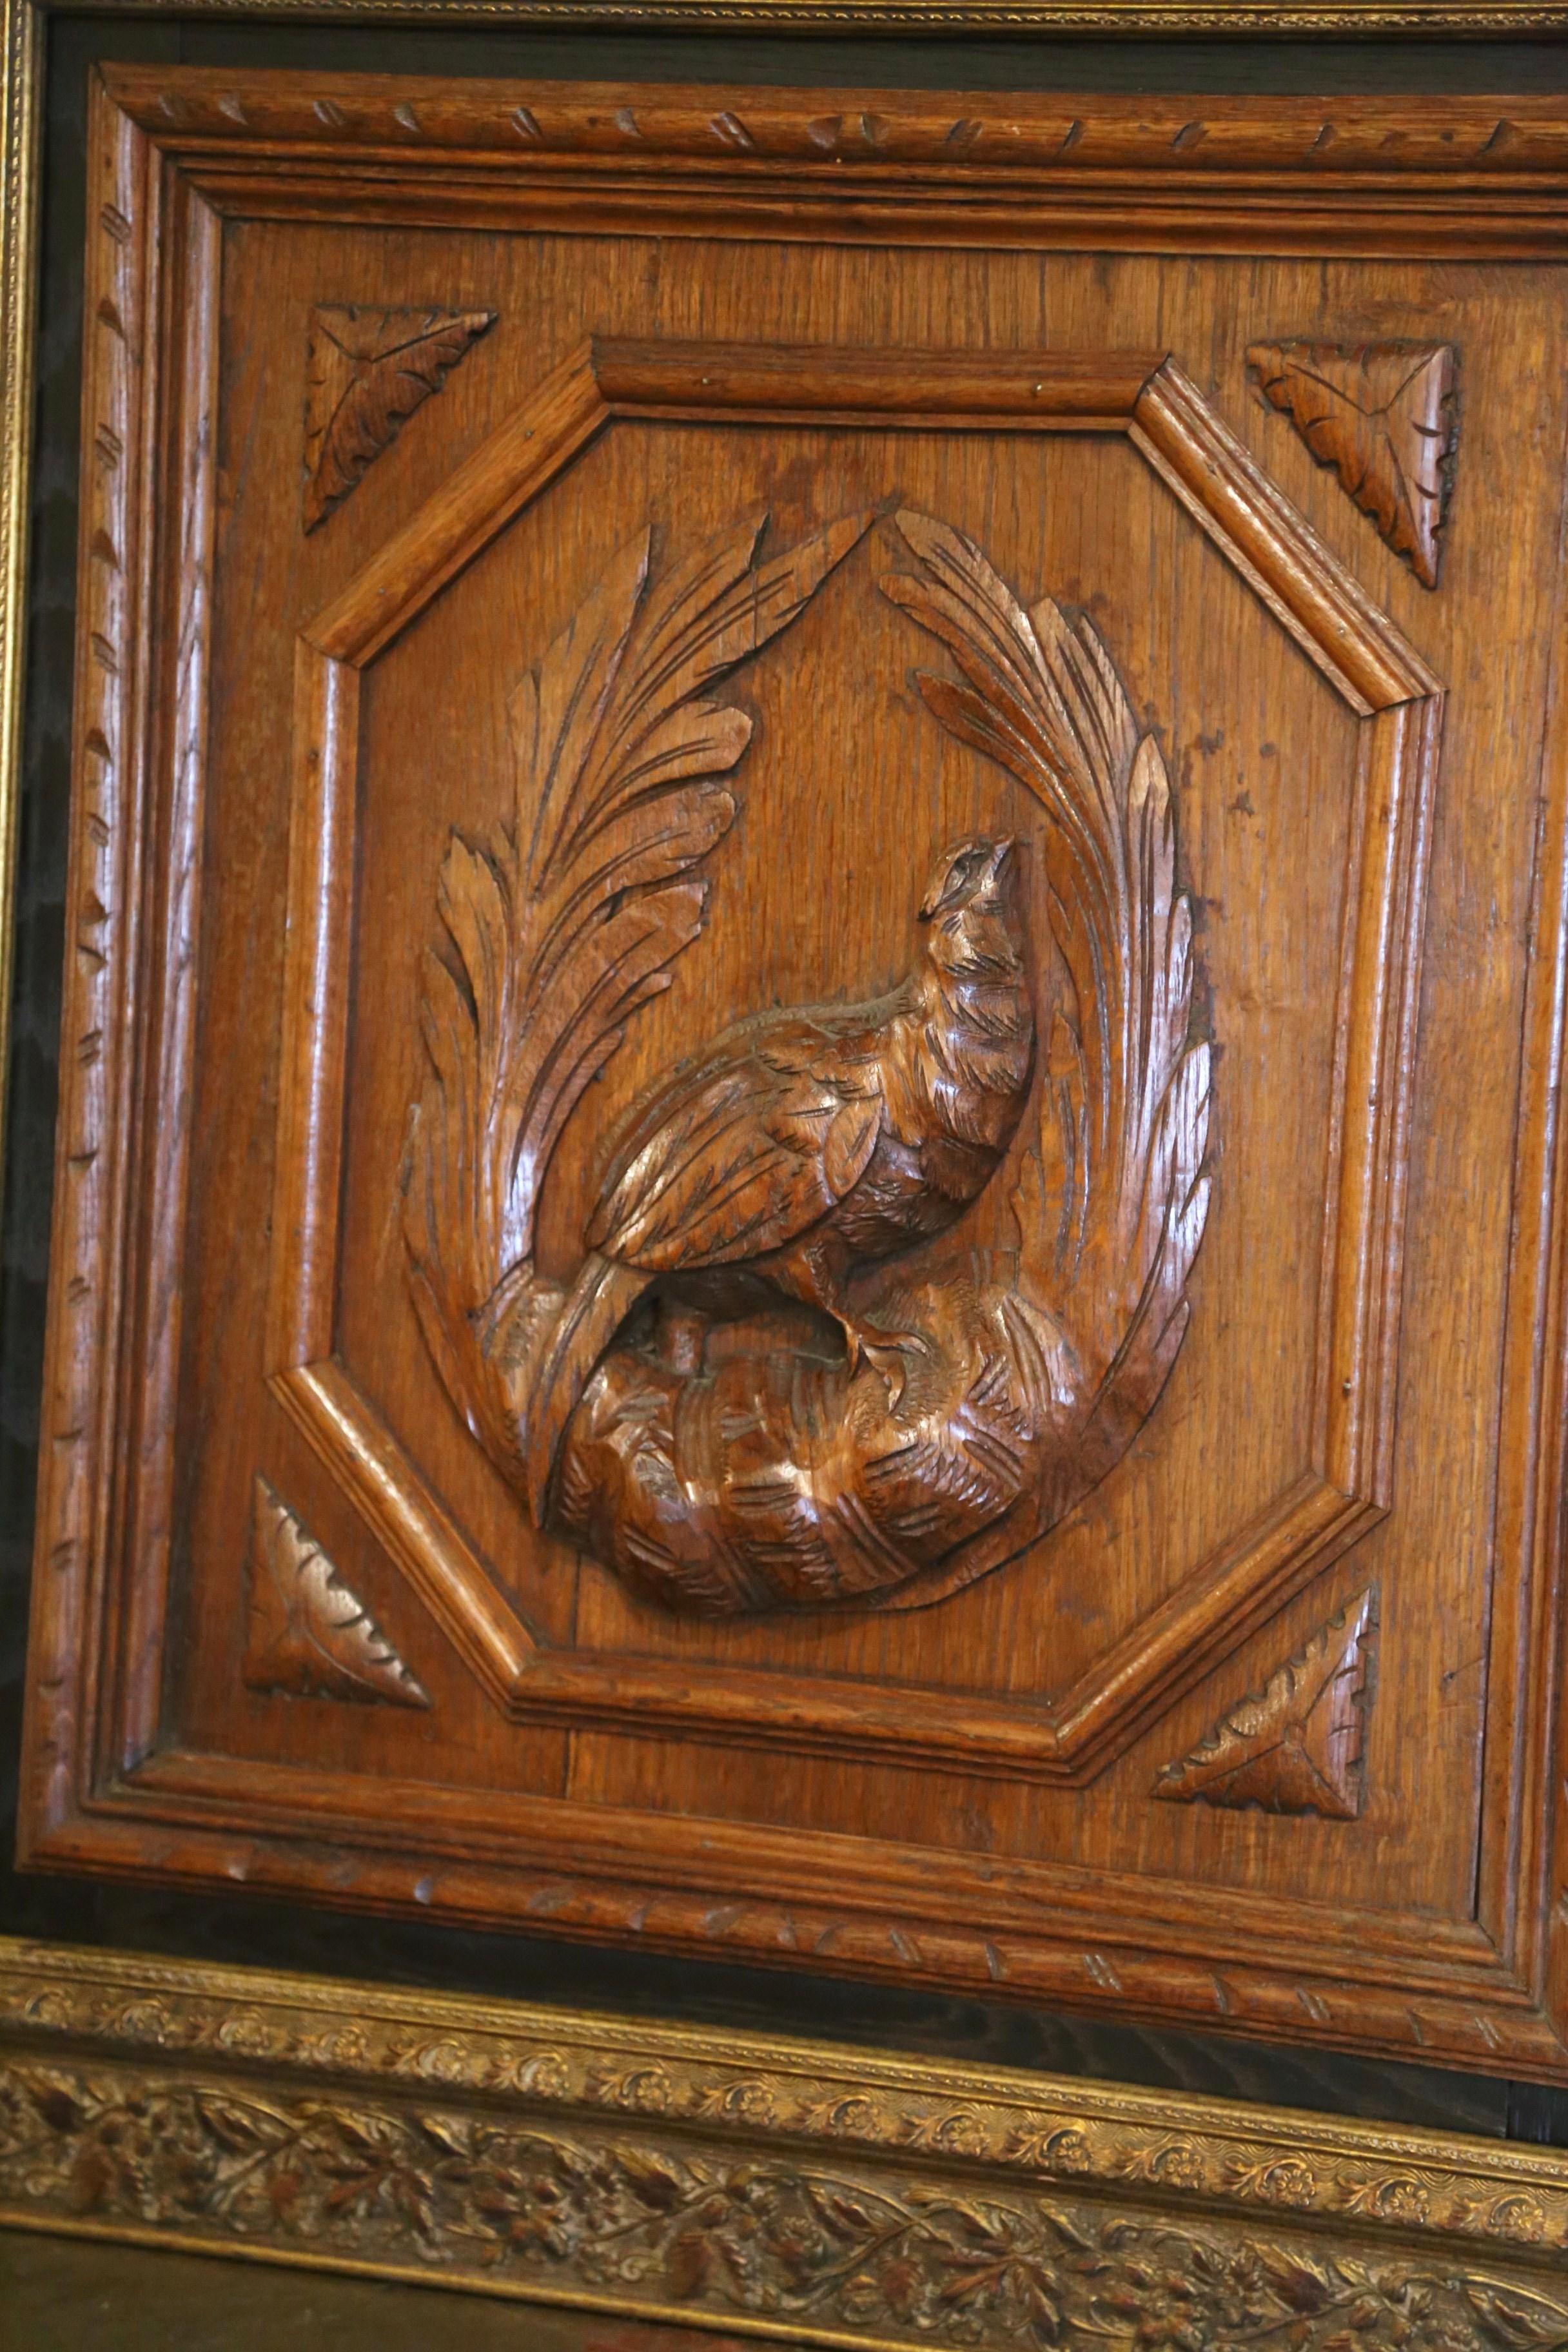 Napoleon III Pair of 19th Century French Carved Oak Wall Panels with Pheasants in Gilt Frames For Sale